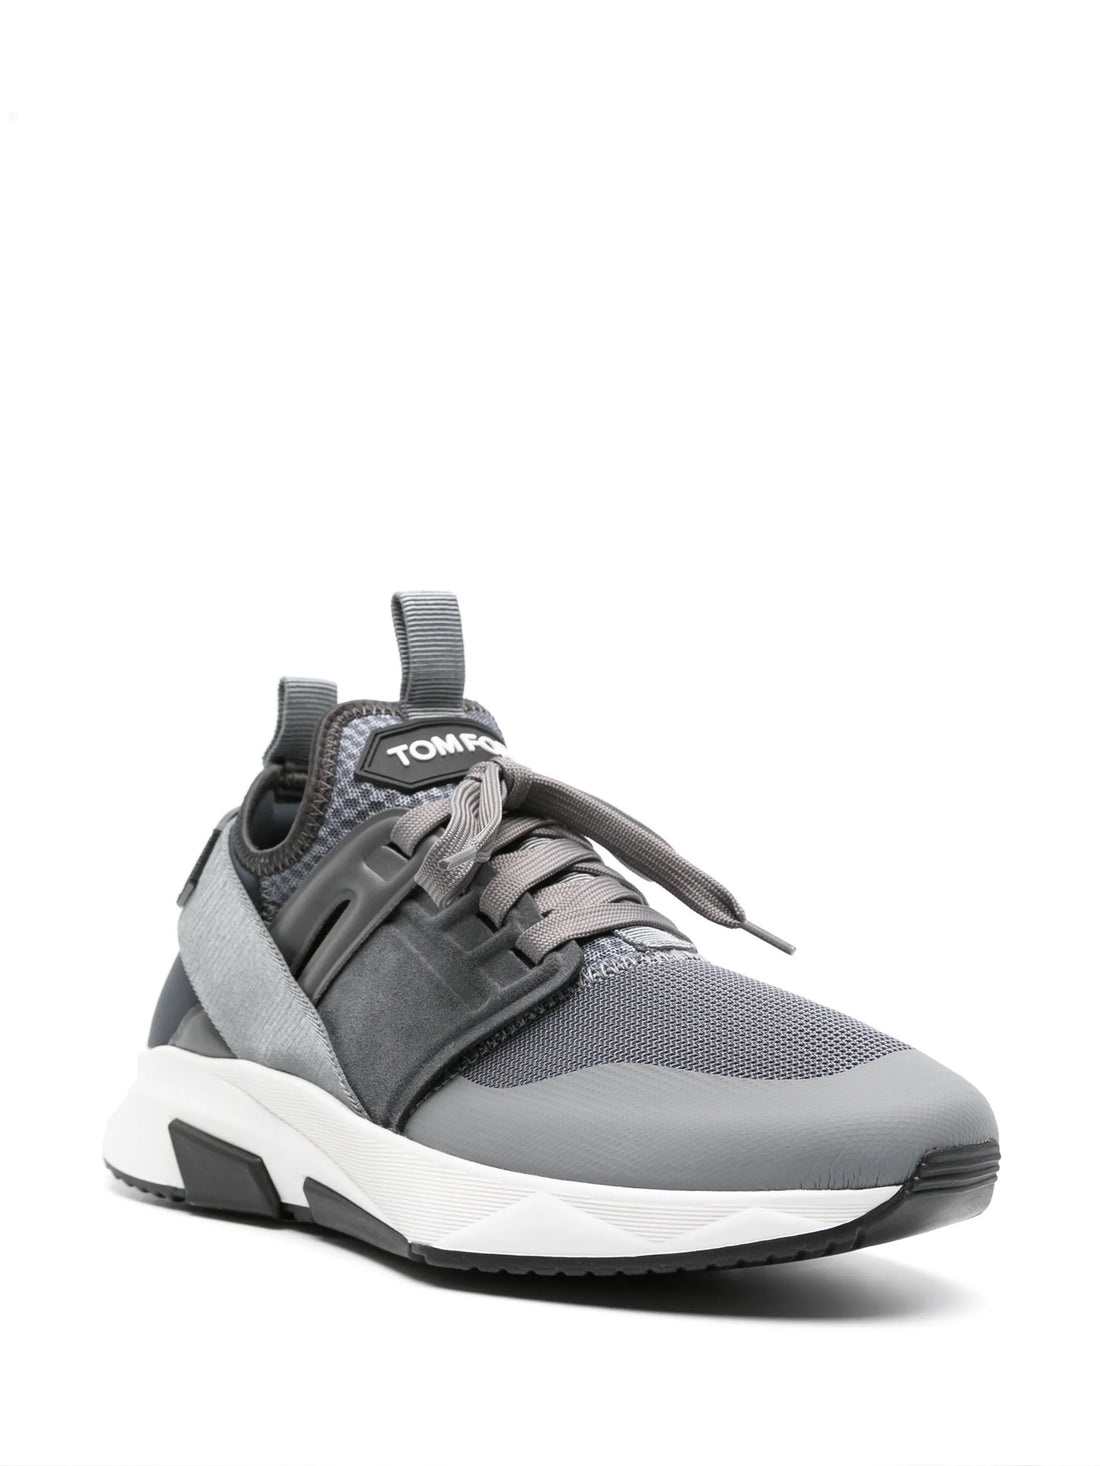 TOM FORD Jago Mesh Panelled Style Sneakers Grey - MAISONDEFASHION.COM